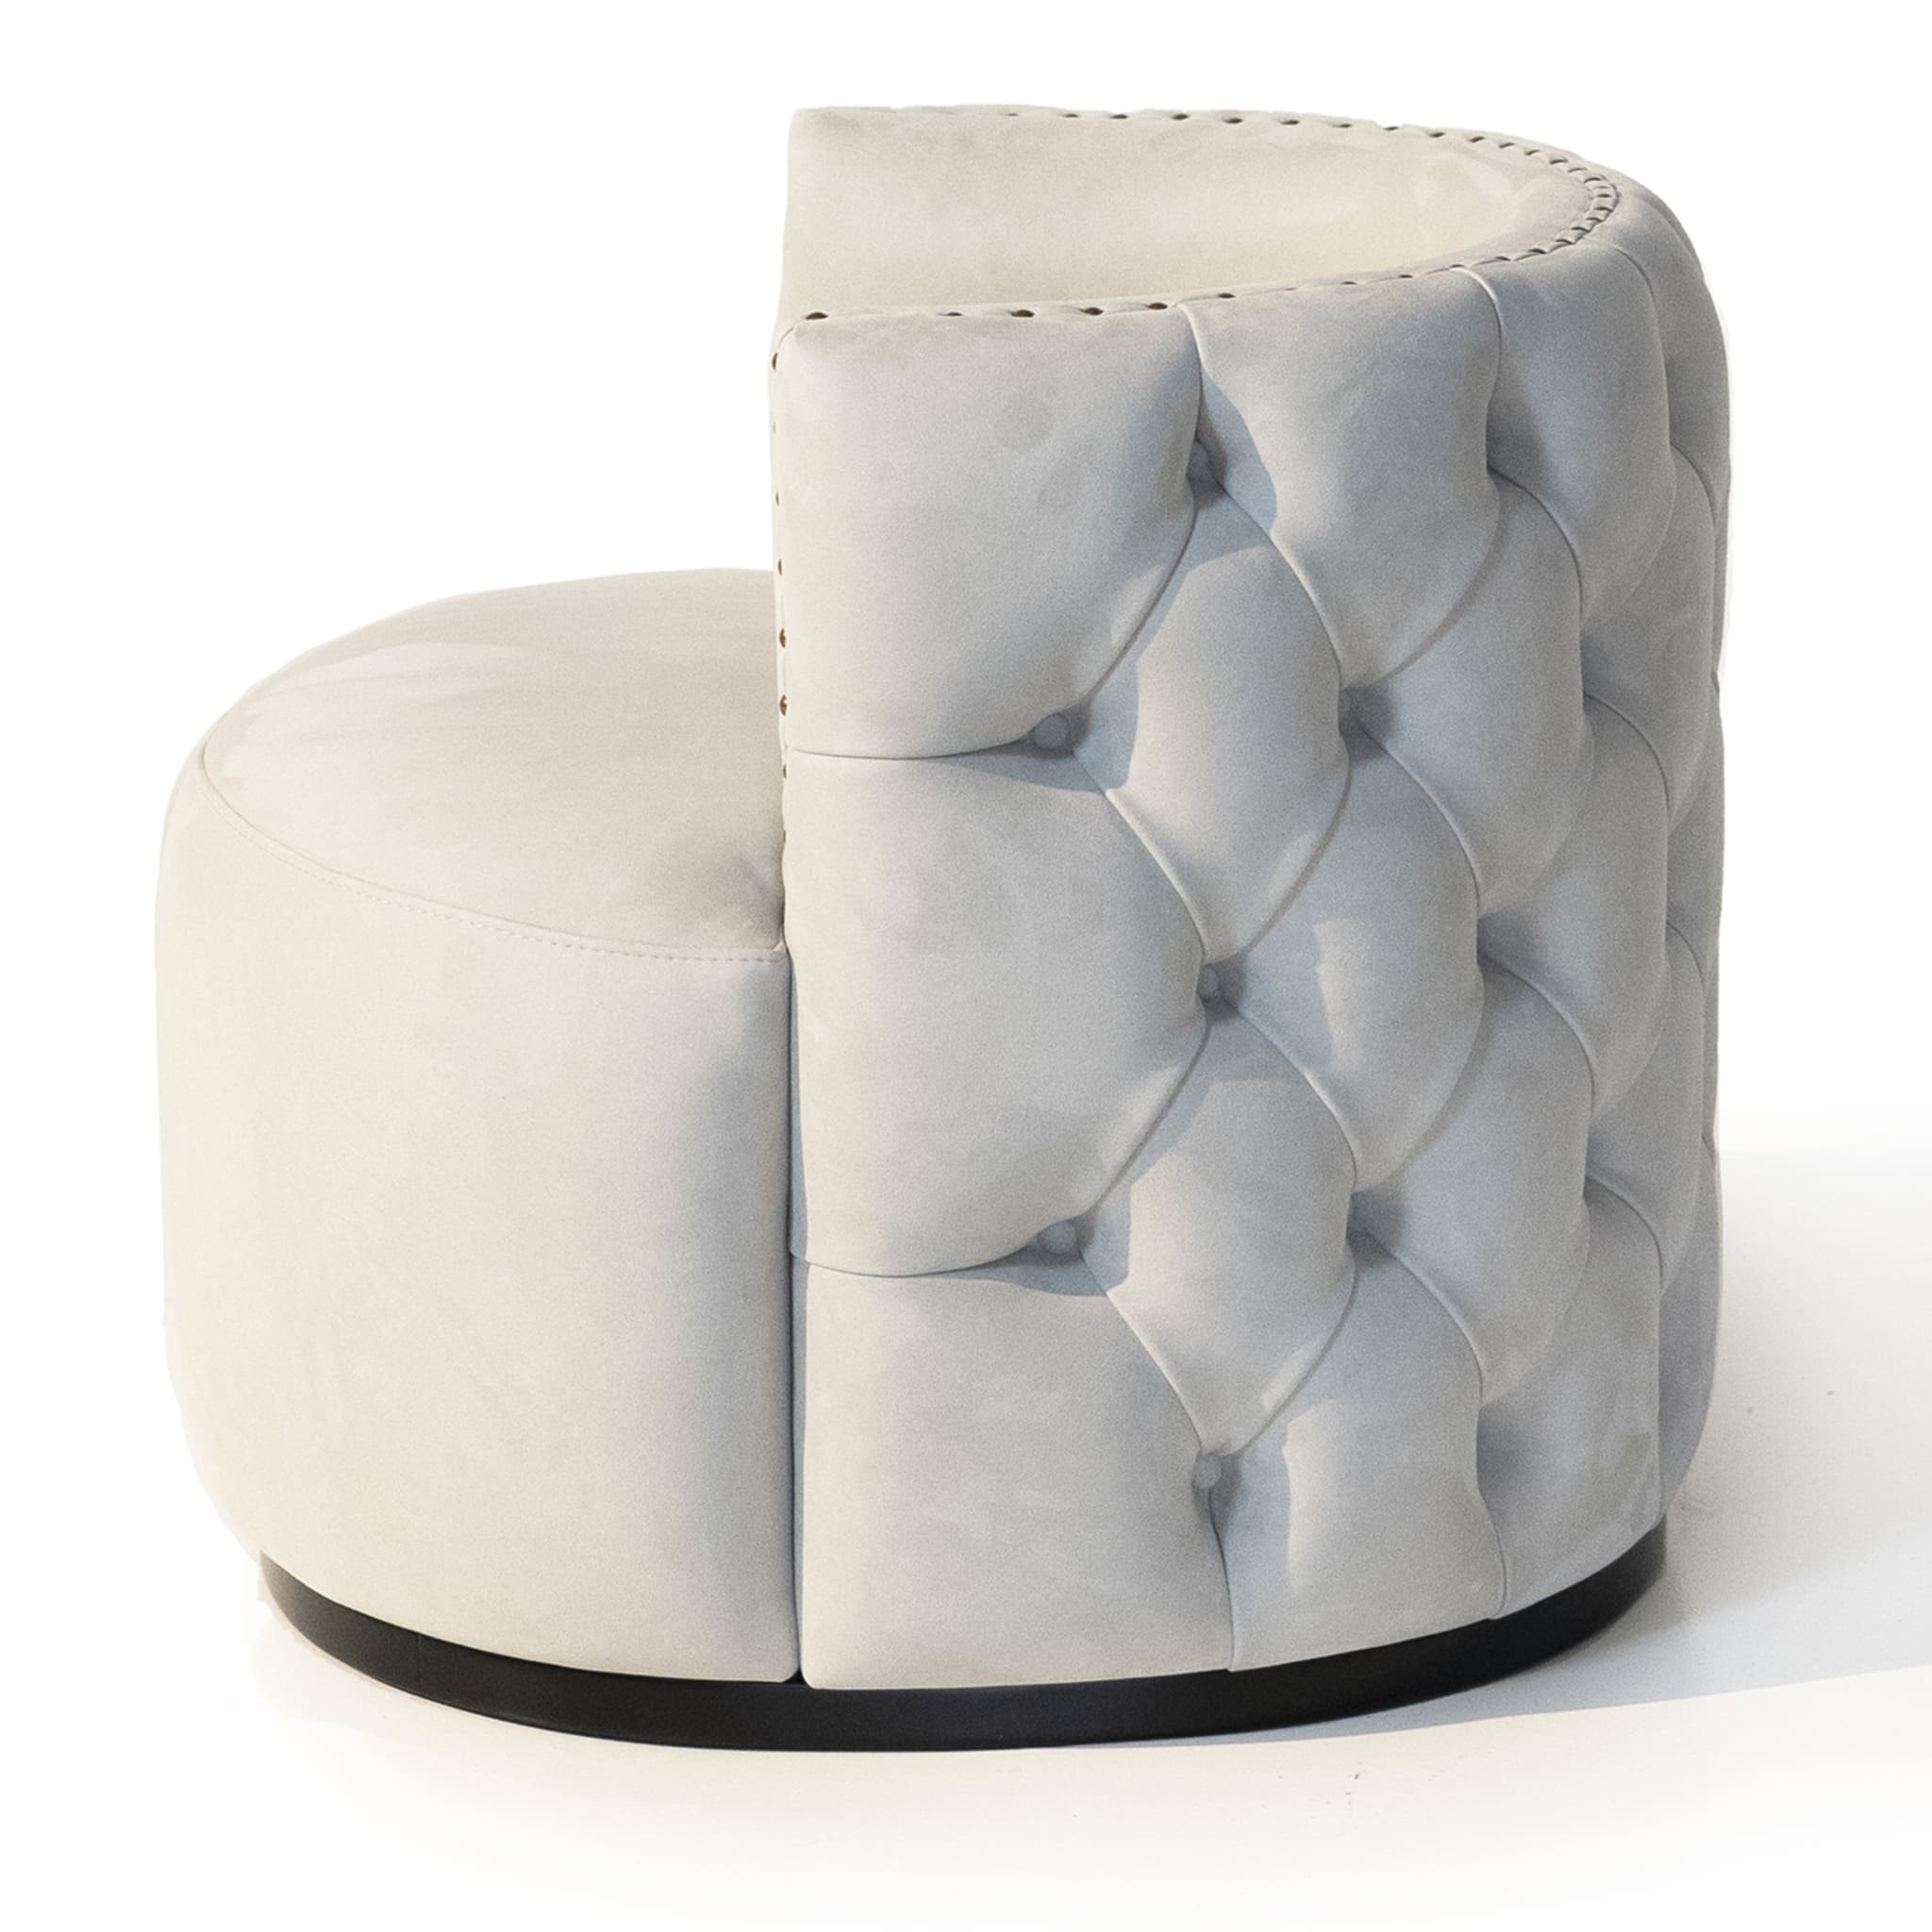 Petra Armchair by Marco and Giulio Mantellassi - Alternative view 1